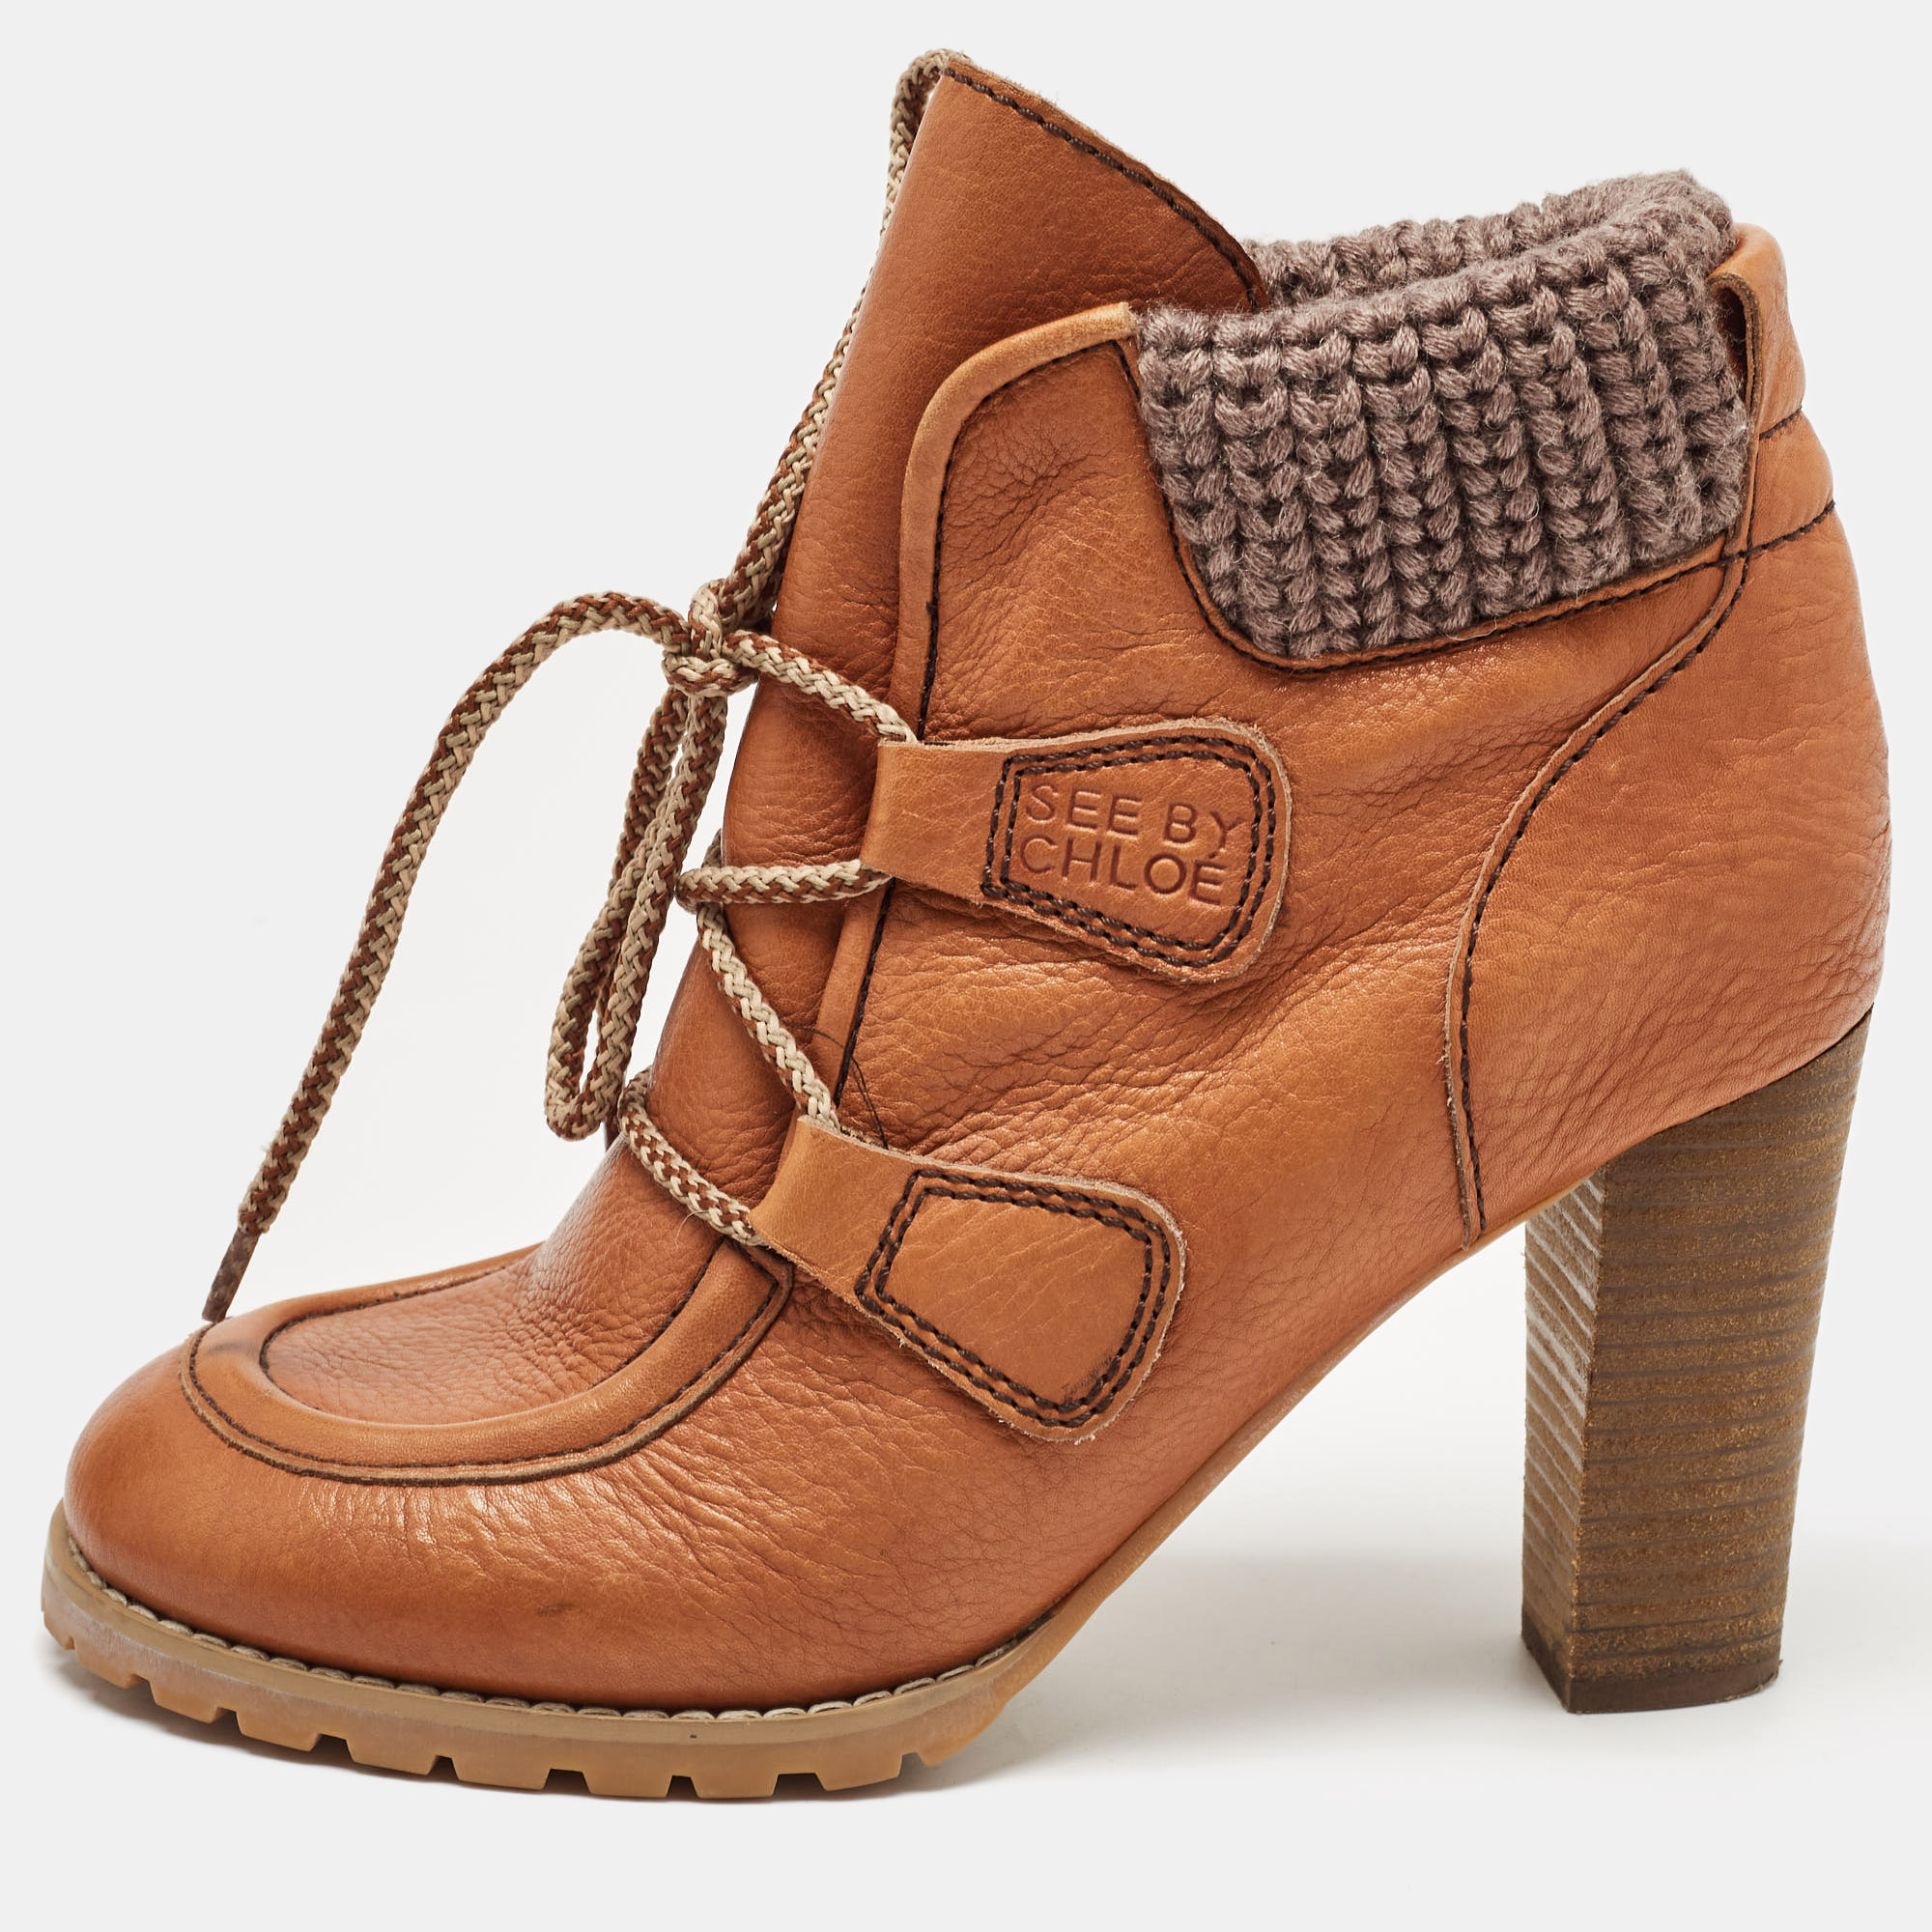 

See by Chloe Brown Leather Lace Up Ankle Boots Size